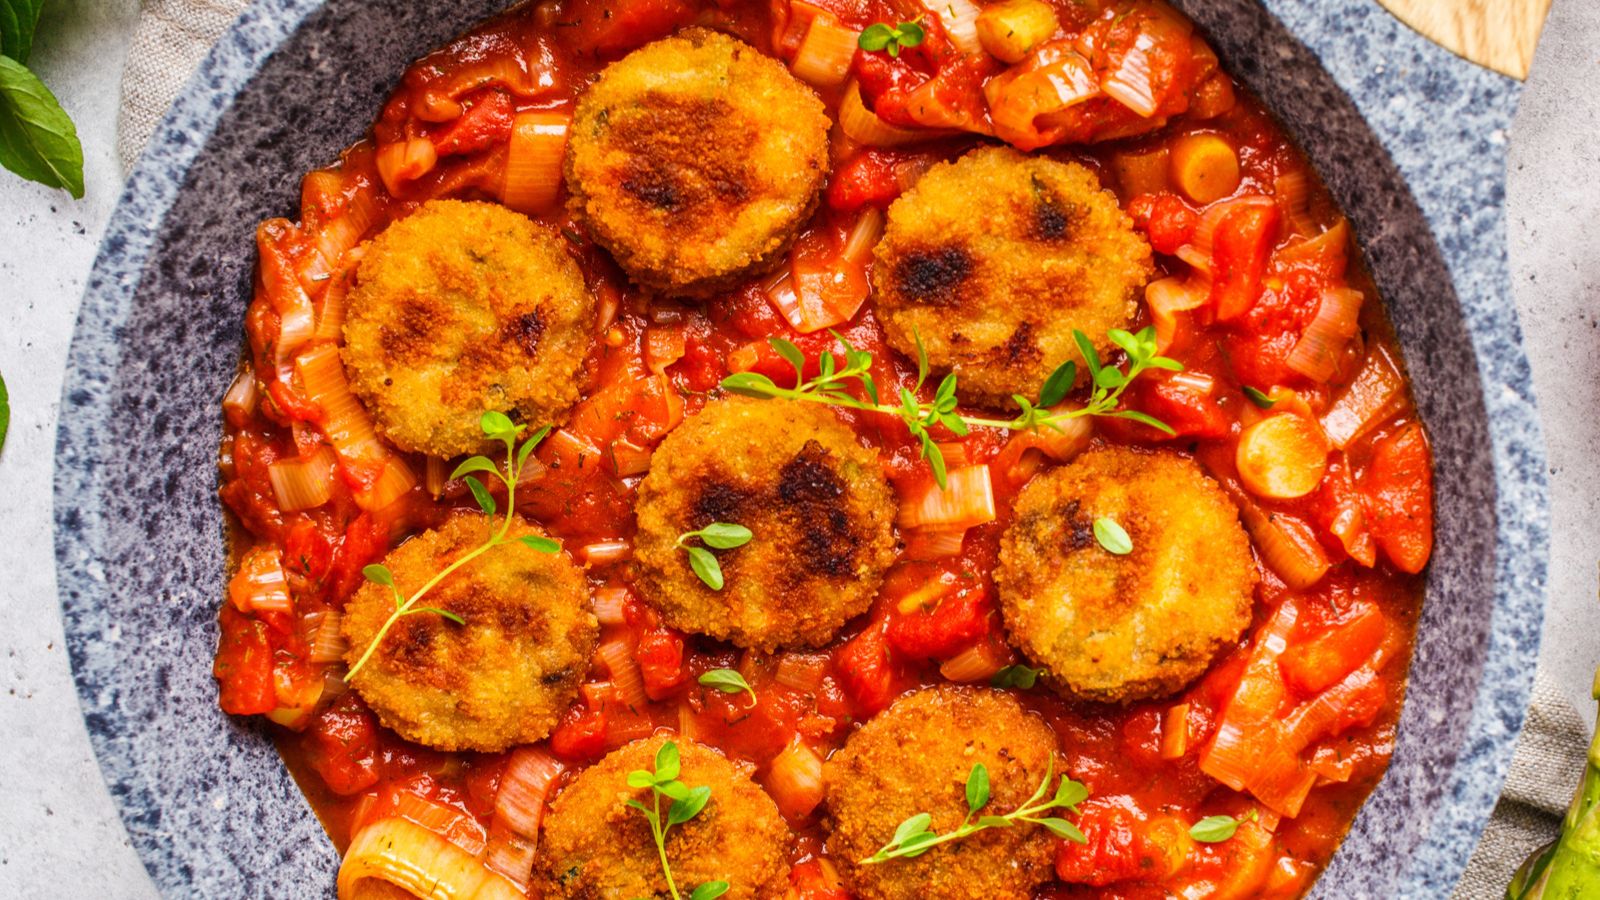 30 Affordable Easy Meals Your Family Will Absolutely Adore